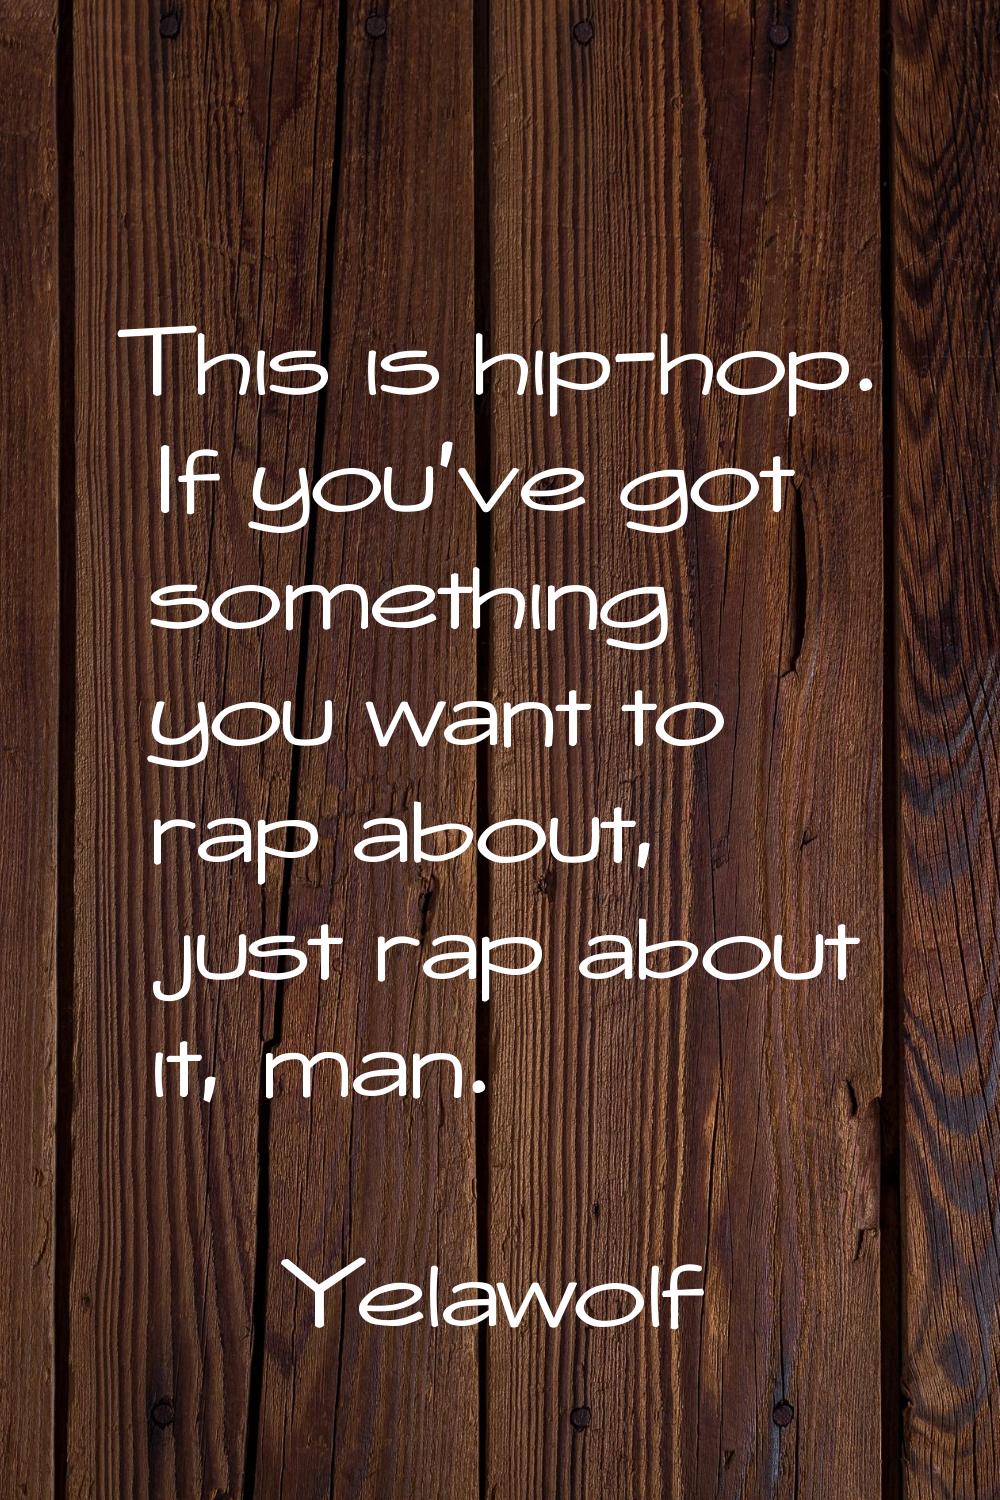 This is hip-hop. If you've got something you want to rap about, just rap about it, man.